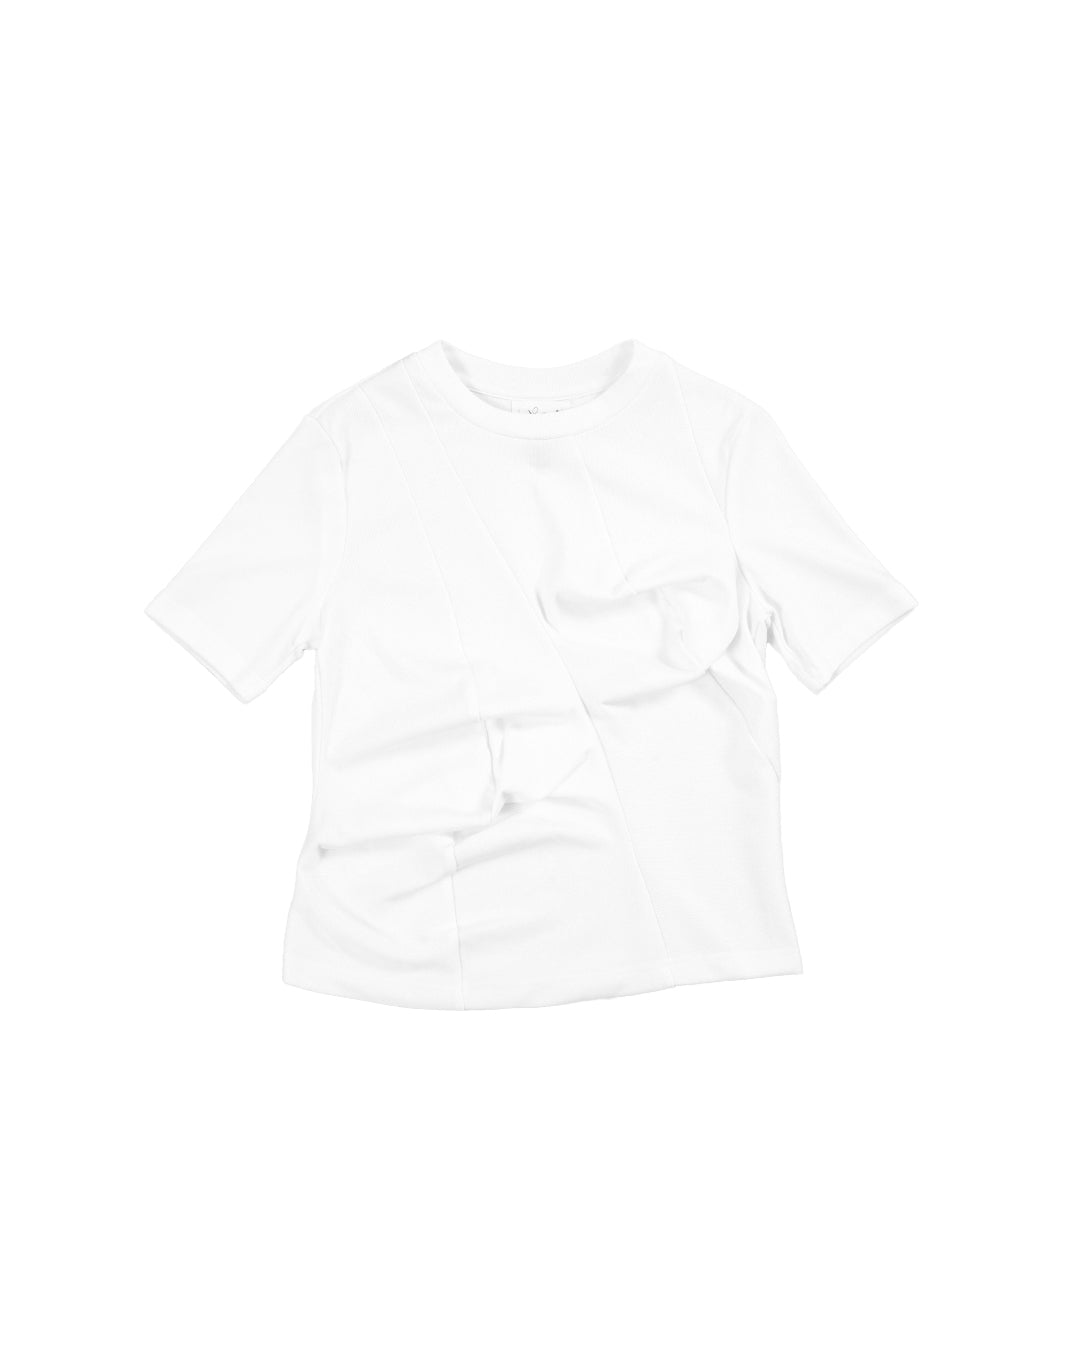 CURVED XUEDI WHITE TEE